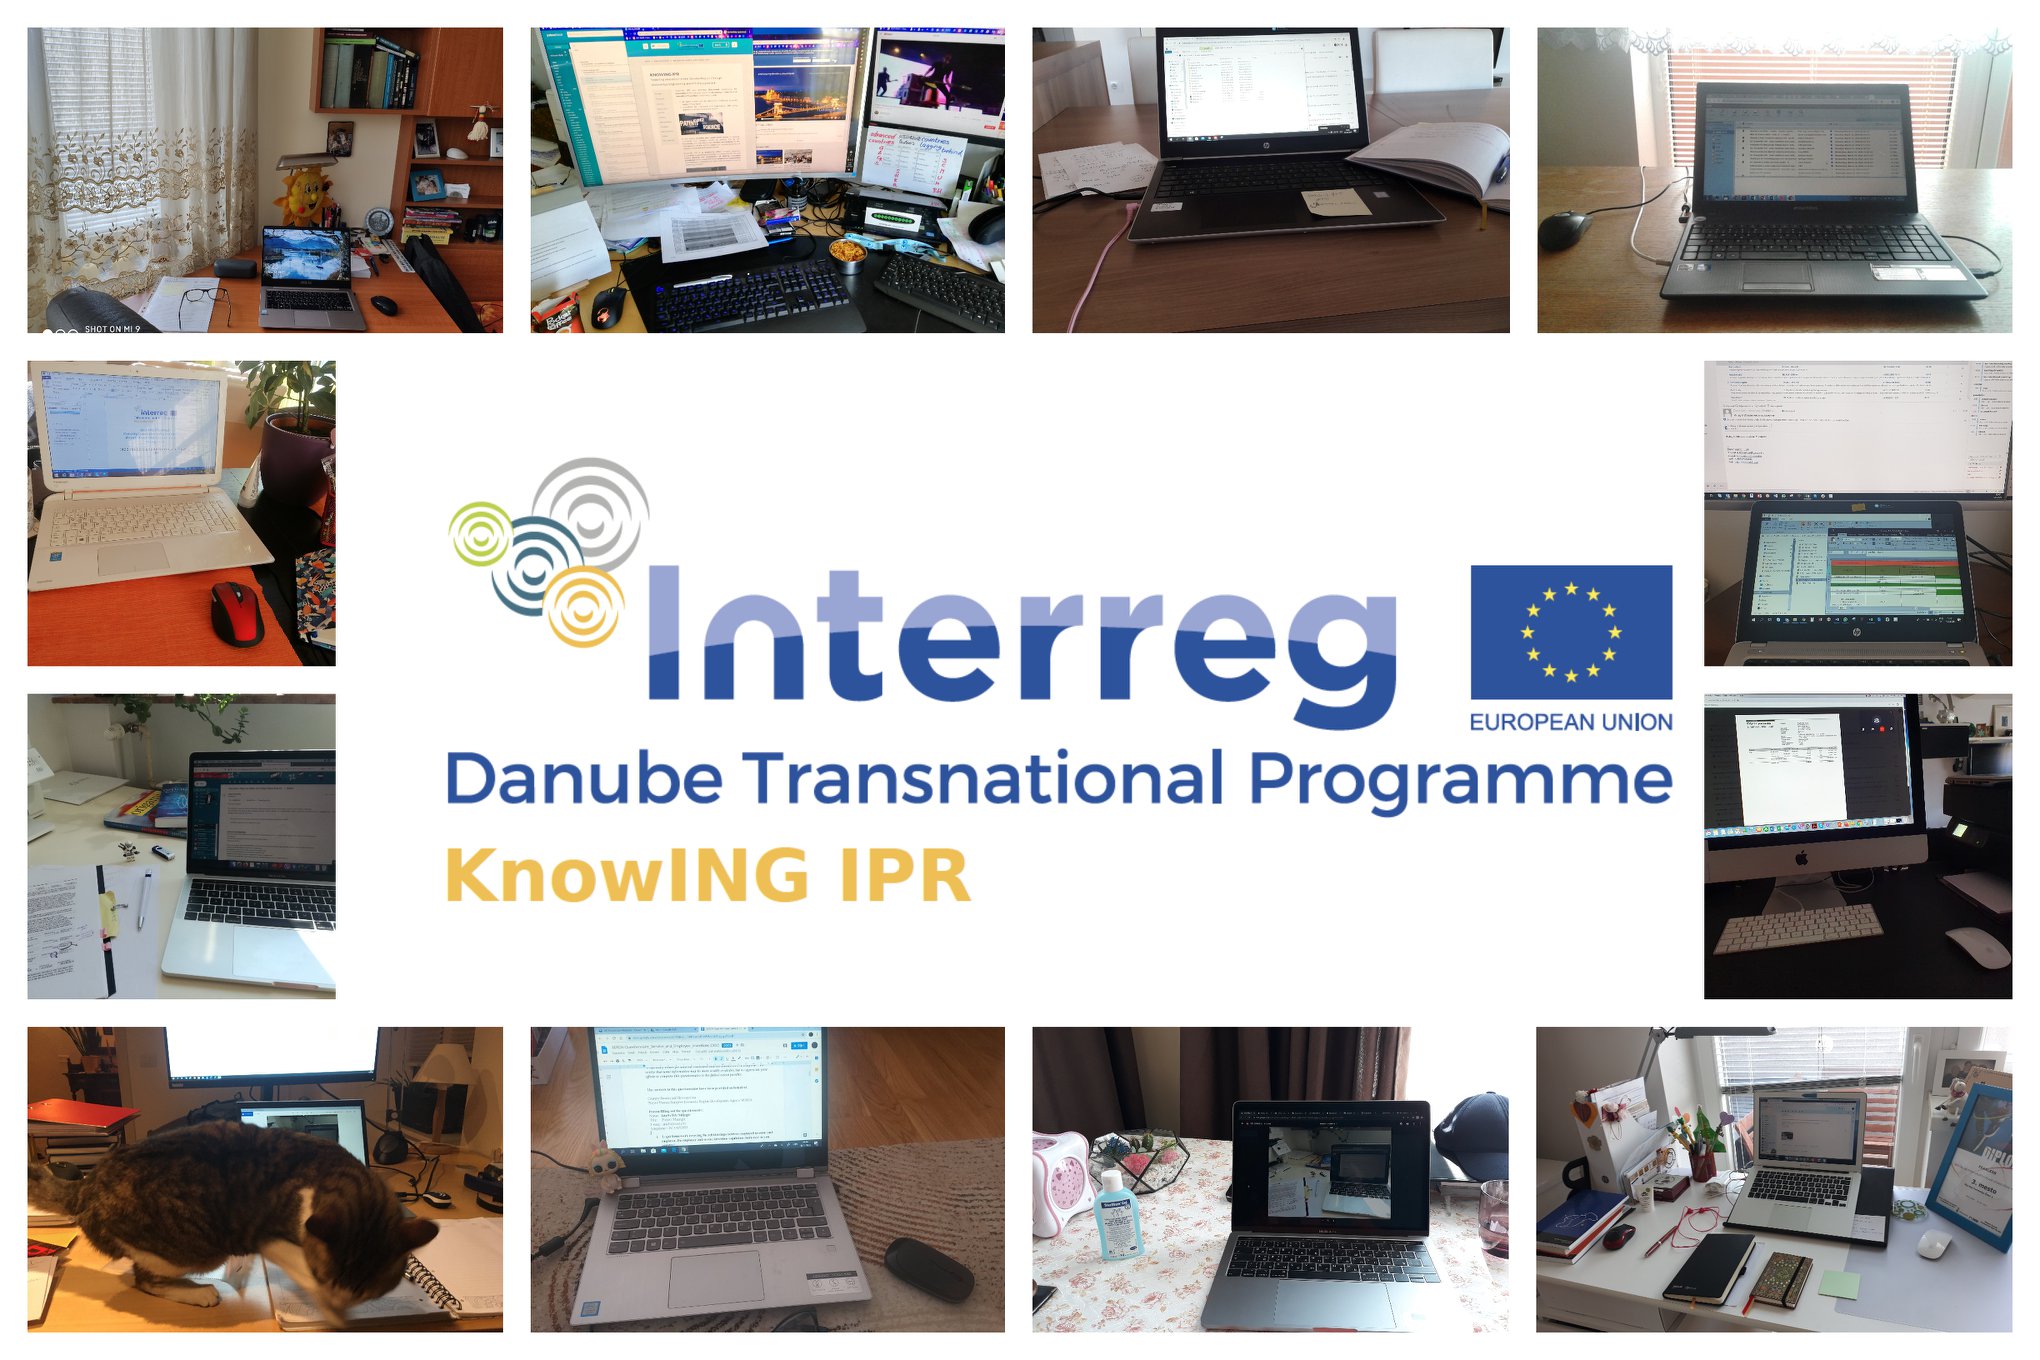 KnowING IPR Newsletter #6